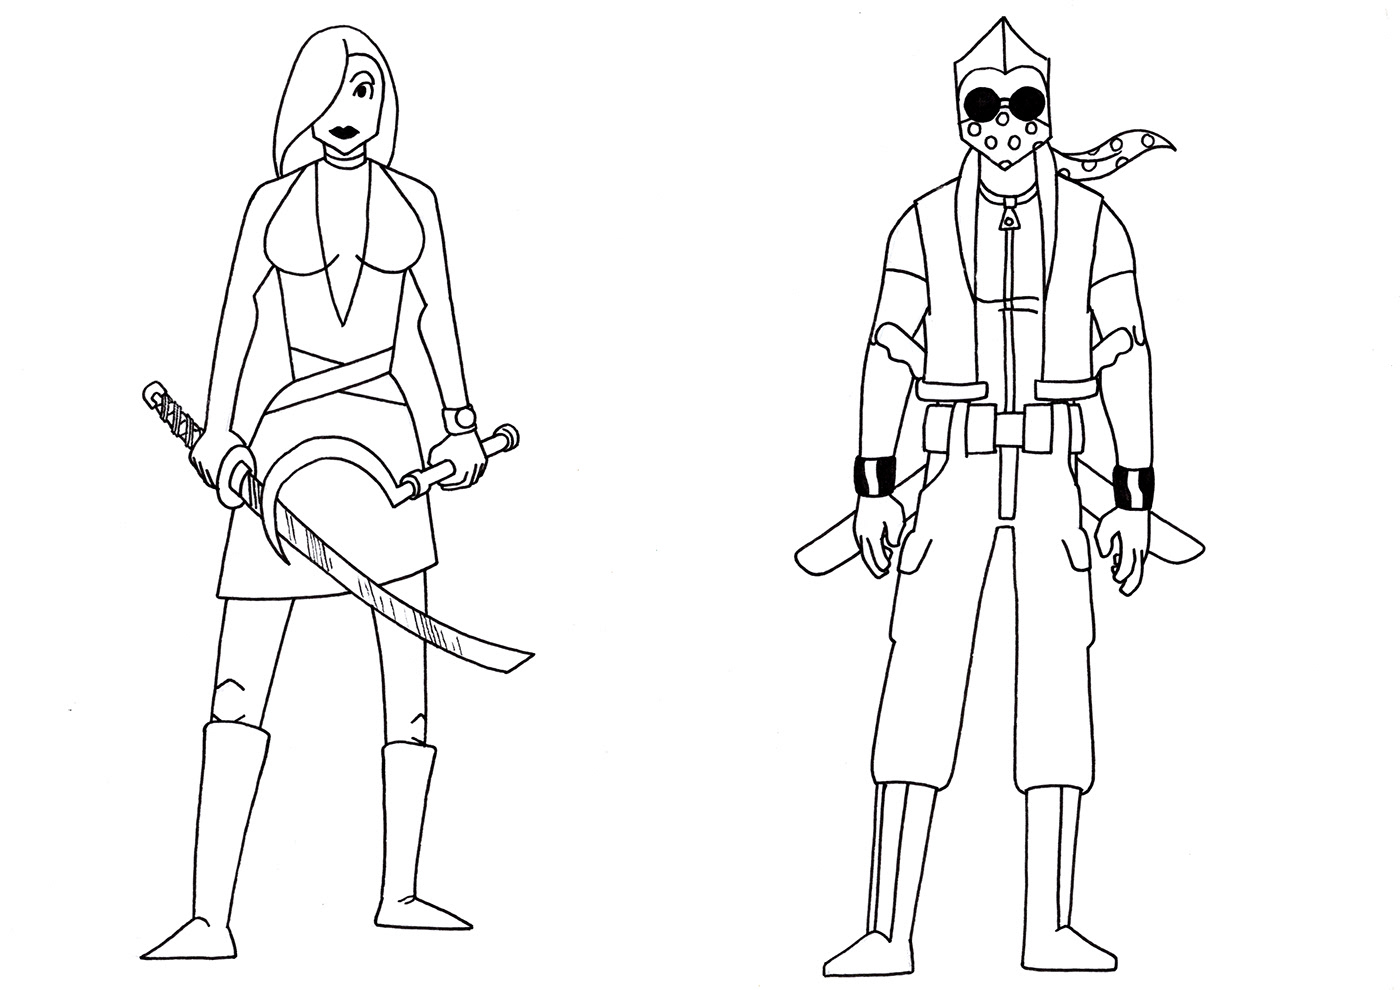 characterdesign Videogames animation  indiecomics sketch Drawing 